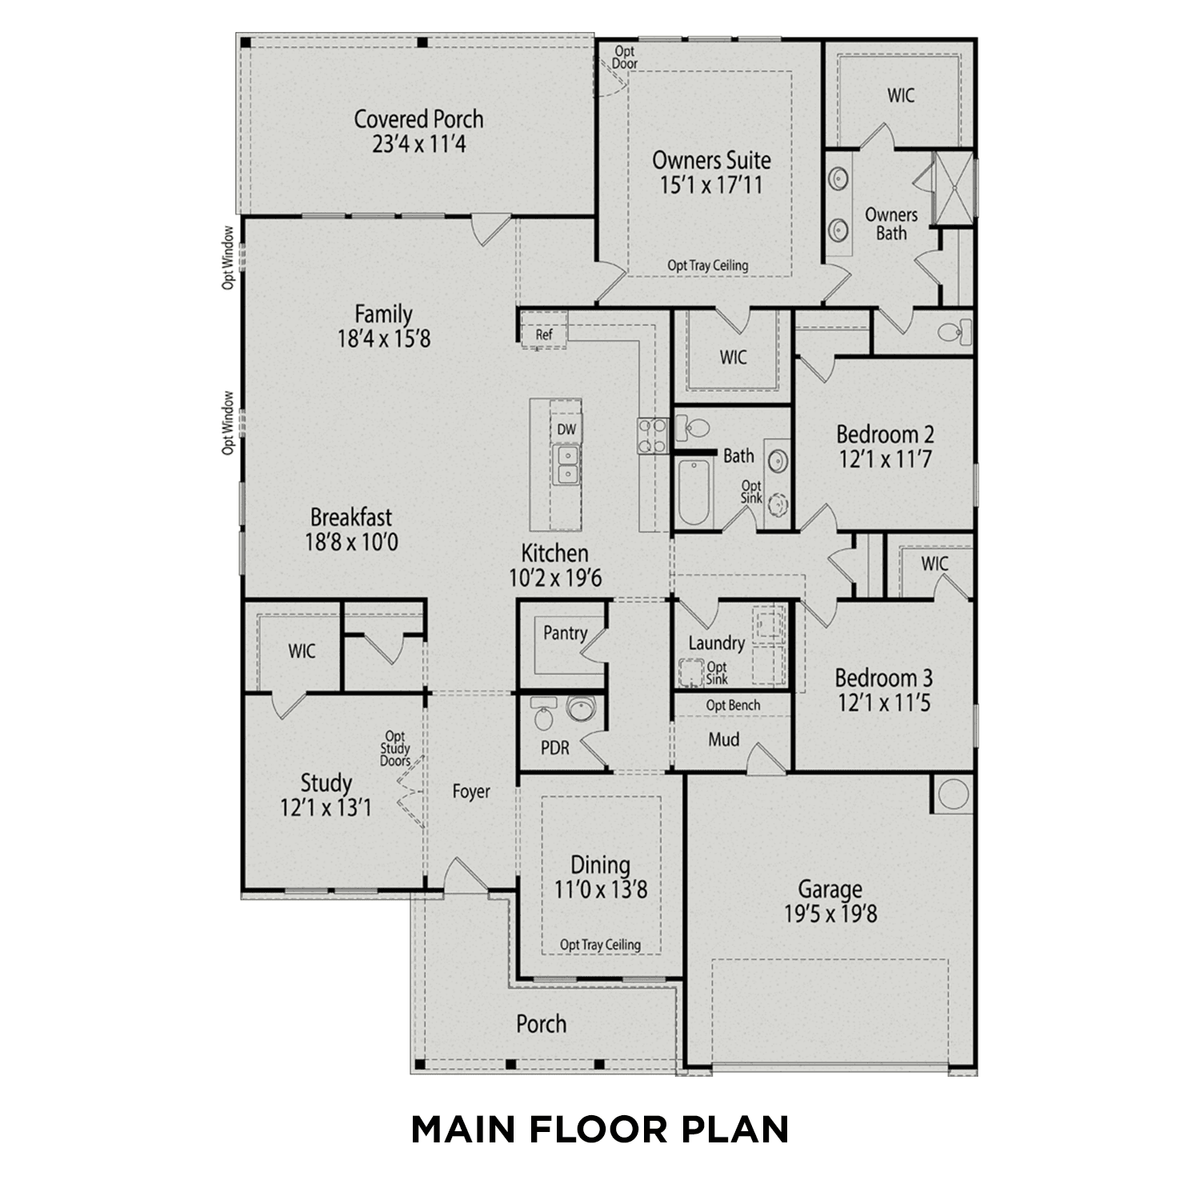 1 - The Magnolia A floor plan layout for 336 Morningside Lane in Davidson Homes' Weatherford East community.